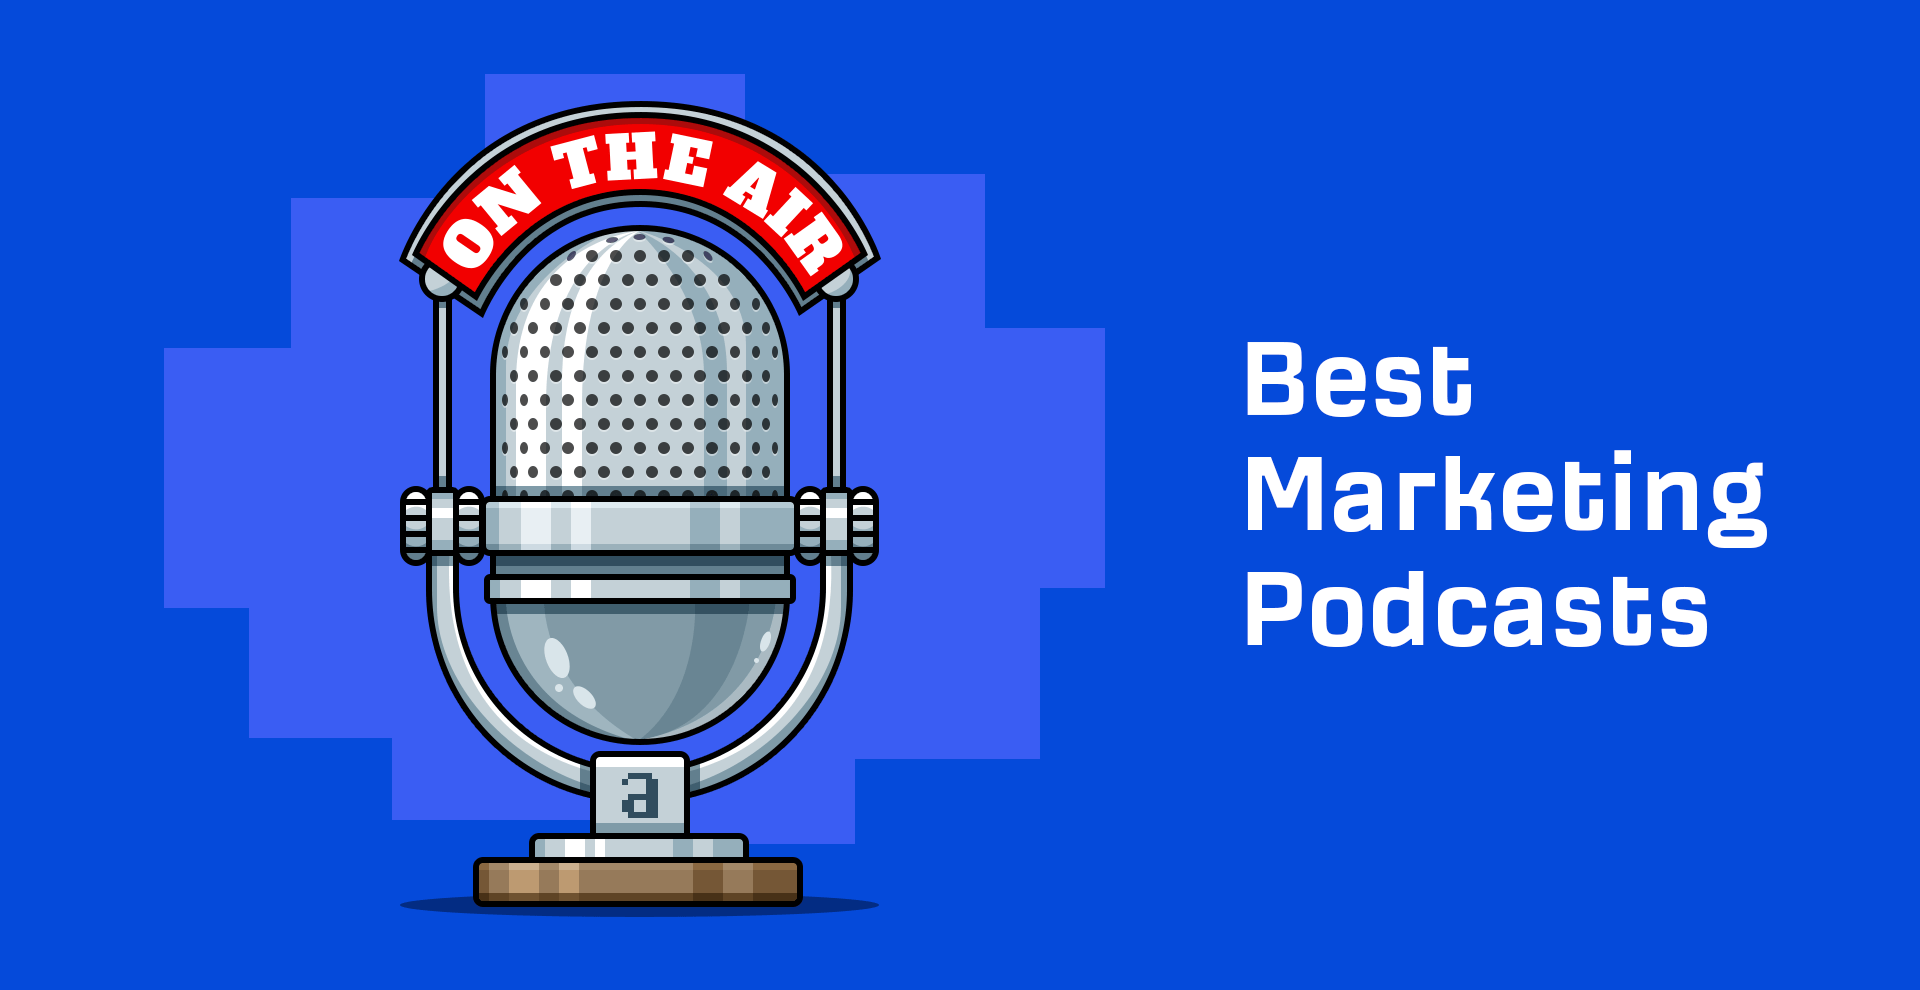 12 Advertising Podcasts Value Your Time